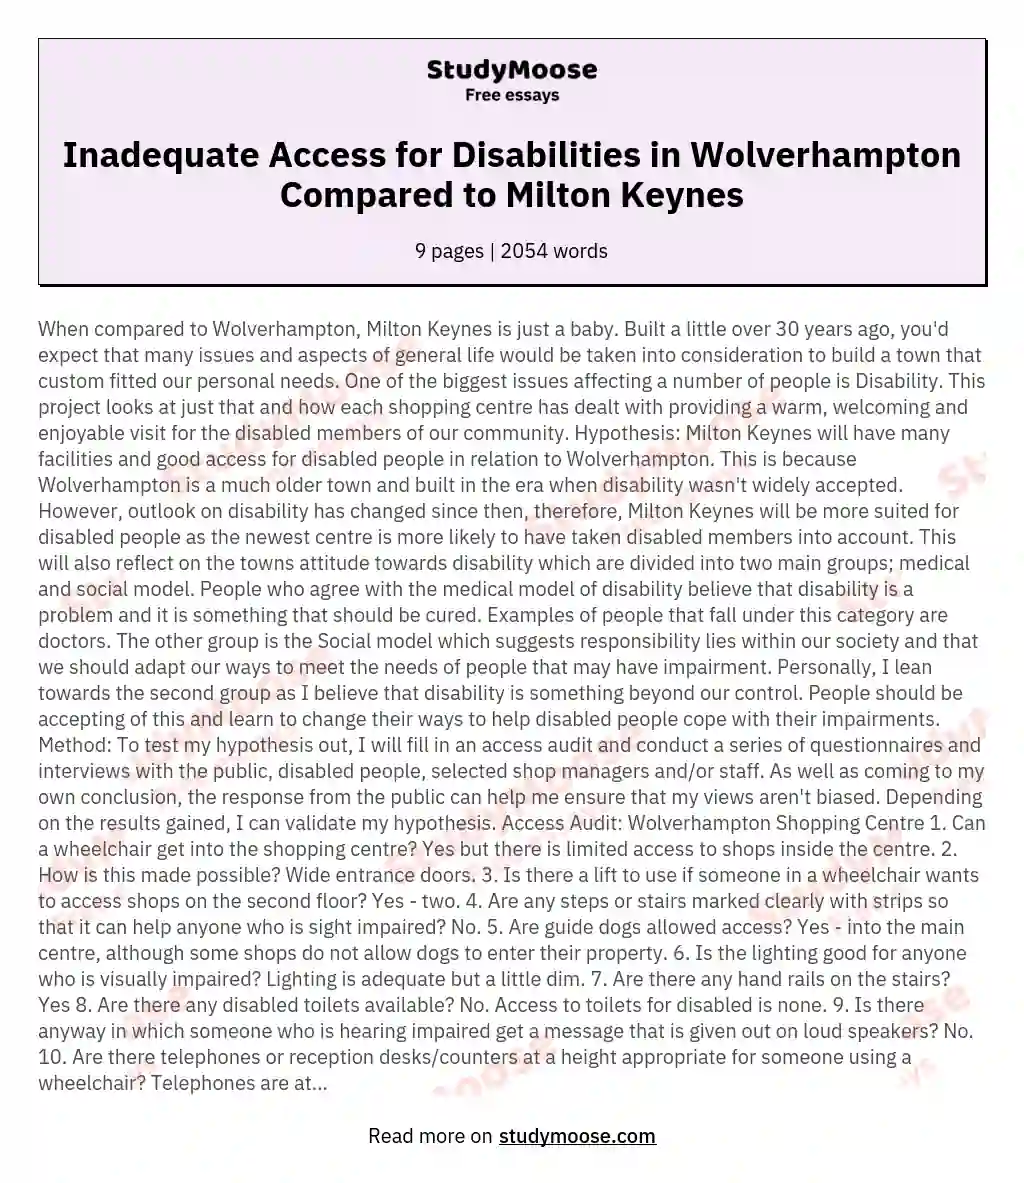 Access Audit: the access for disabled people to Wolverhampton city centre is inadequate and unequal when comparing it to Milton Keynes